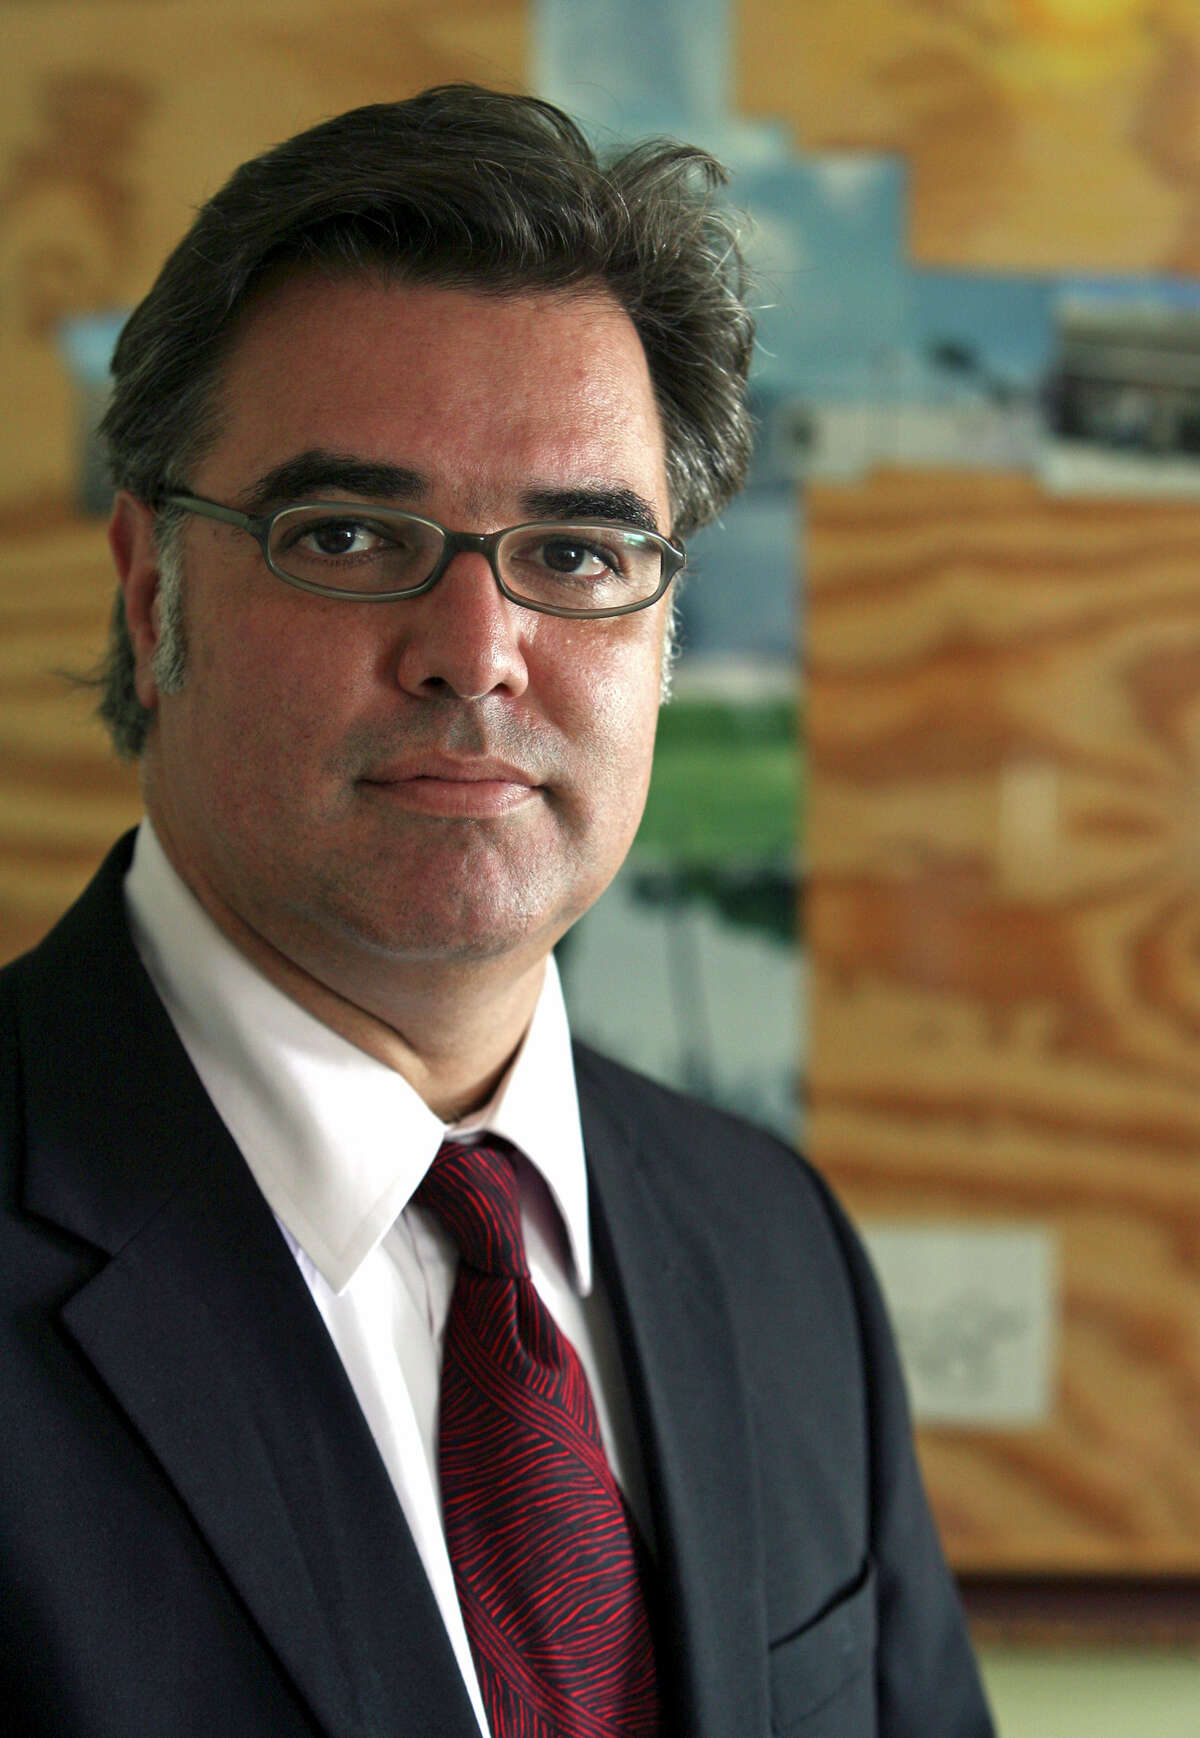 Felix Padrón is director of the City of San Antonio Office of Cultural Affairs.